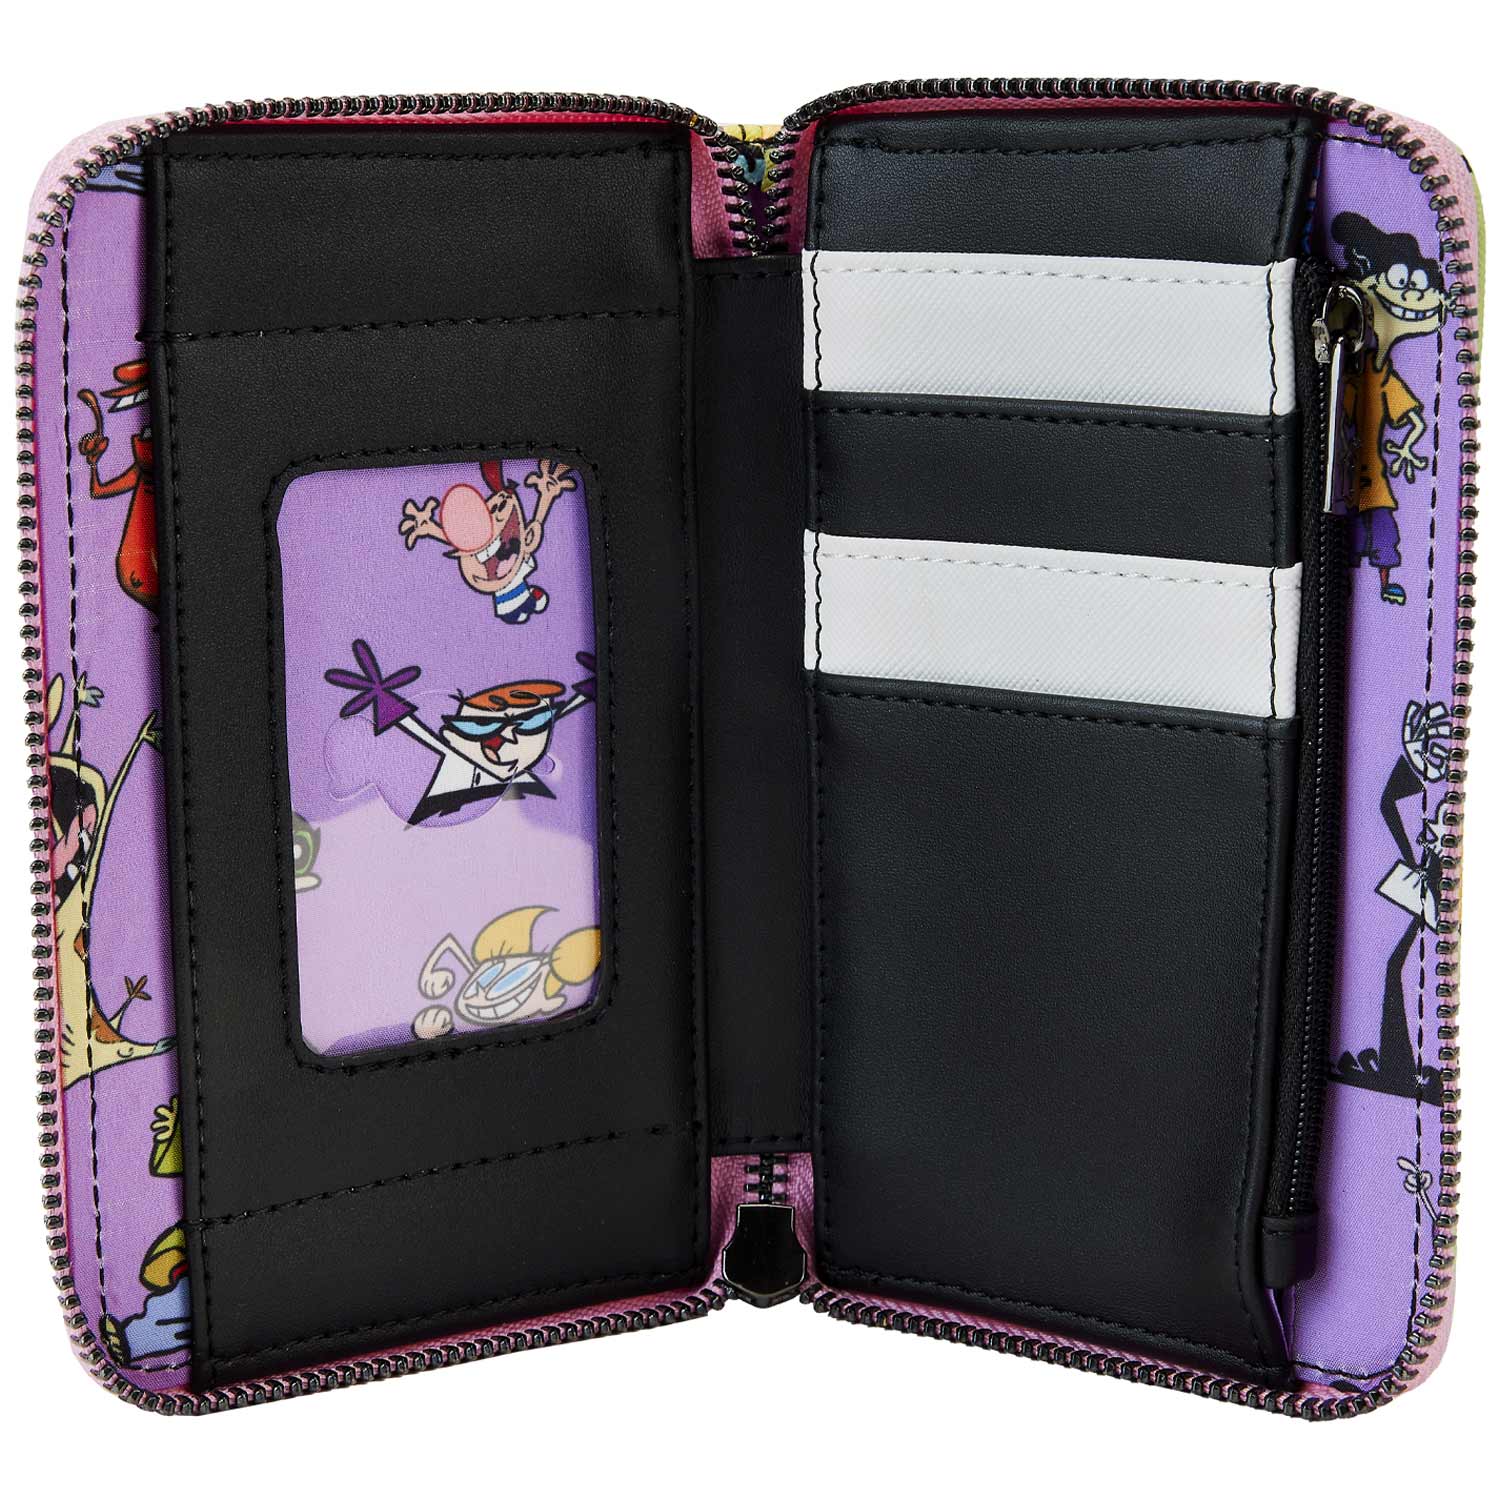 Loungefly x Cartoon Network Retro Collage Wallet - GeekCore